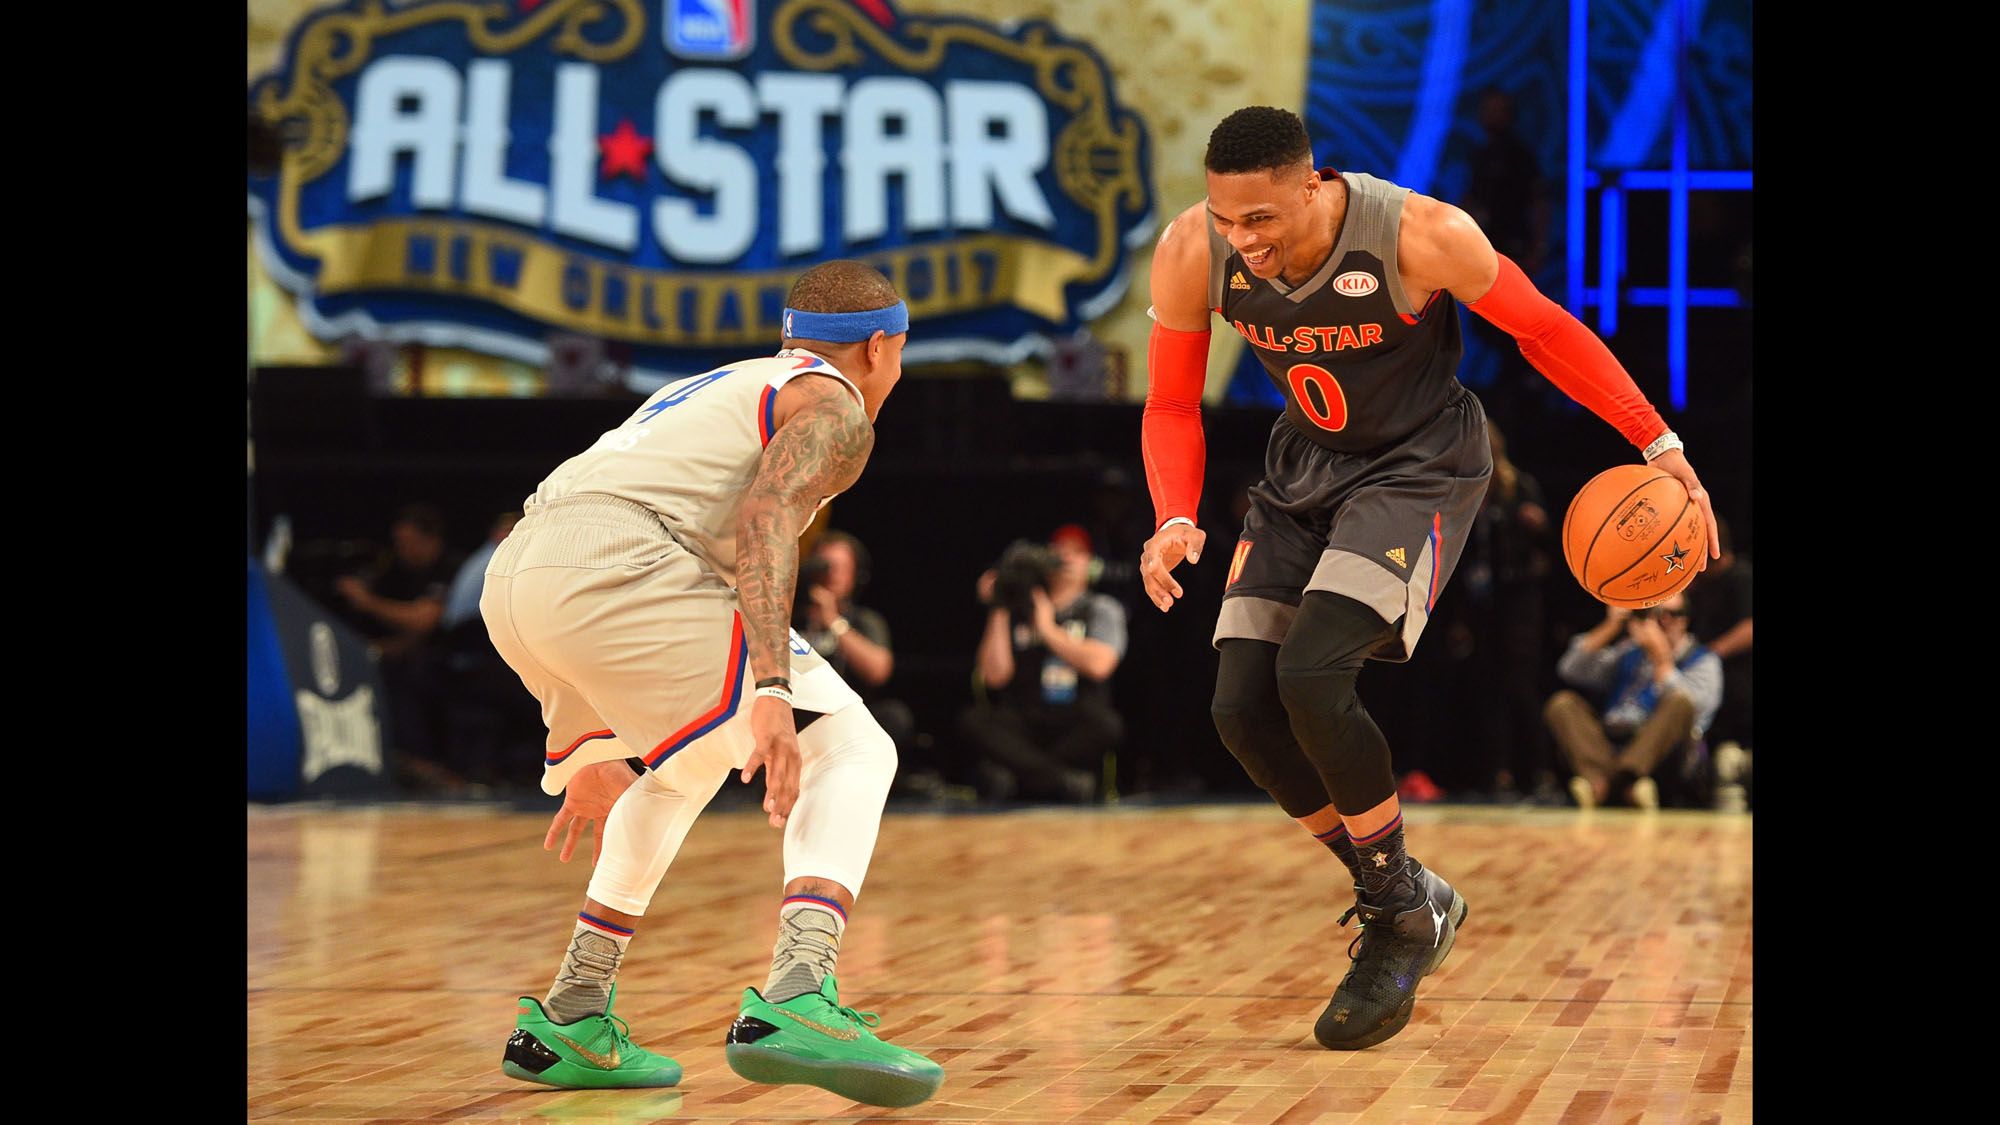 2017 NBA All-Star Game garners 7.8 million viewers, most since 2013